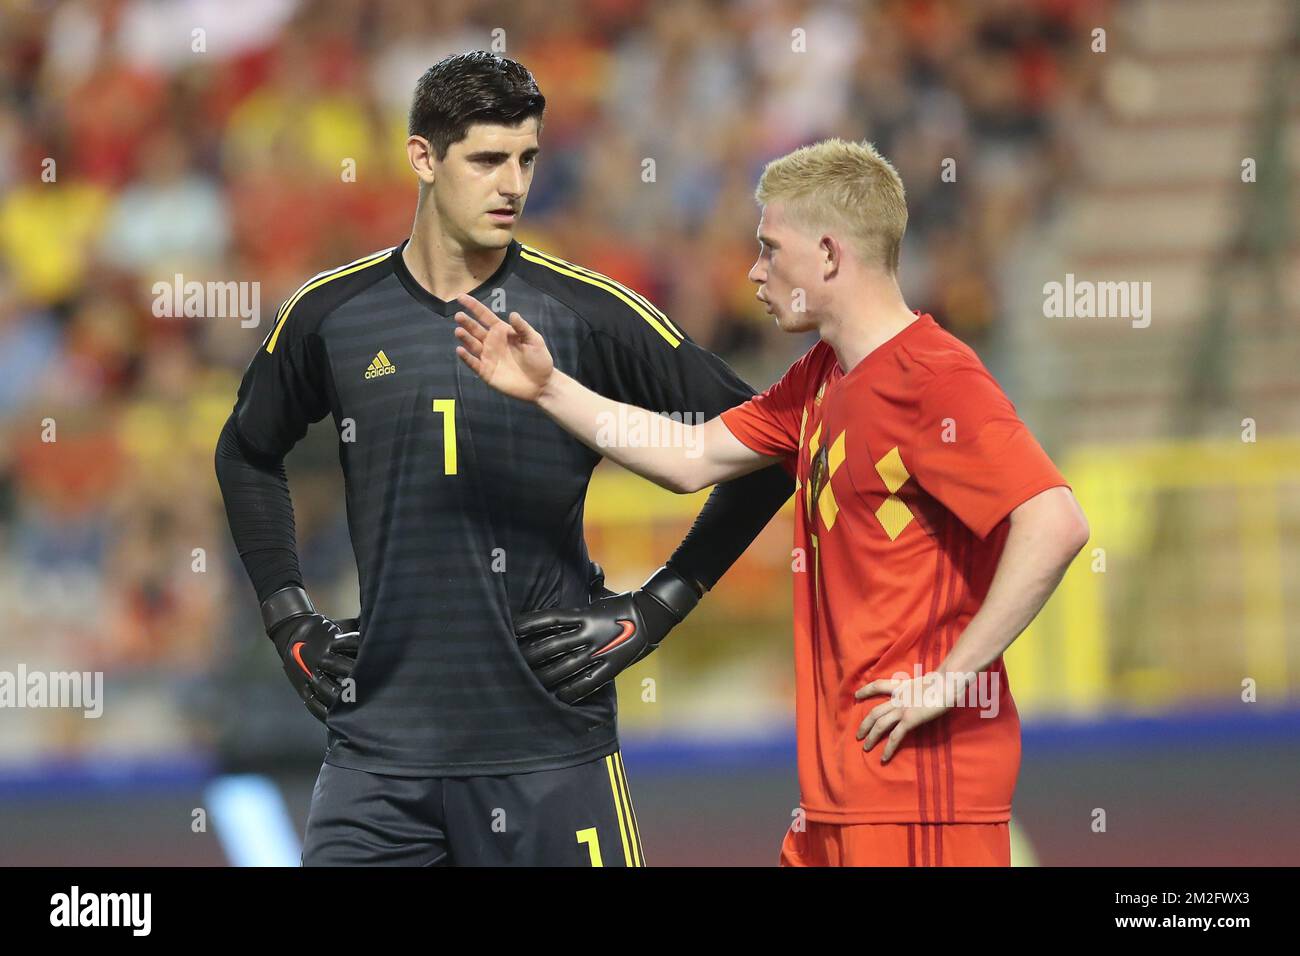 Belgium's goalkeeper Thibaut Courtois and Belgium's Kevin De Bruyne pictured during a friendly game between Belgium national team, The Red Devils and Egyptian national soccer team, Wednesday 06 June 2018, in Brussels. Both teams prepare the upcoming FIFA World Cup 2018 in Russia. BELGA PHOTO BRUNO FAHY Stock Photo